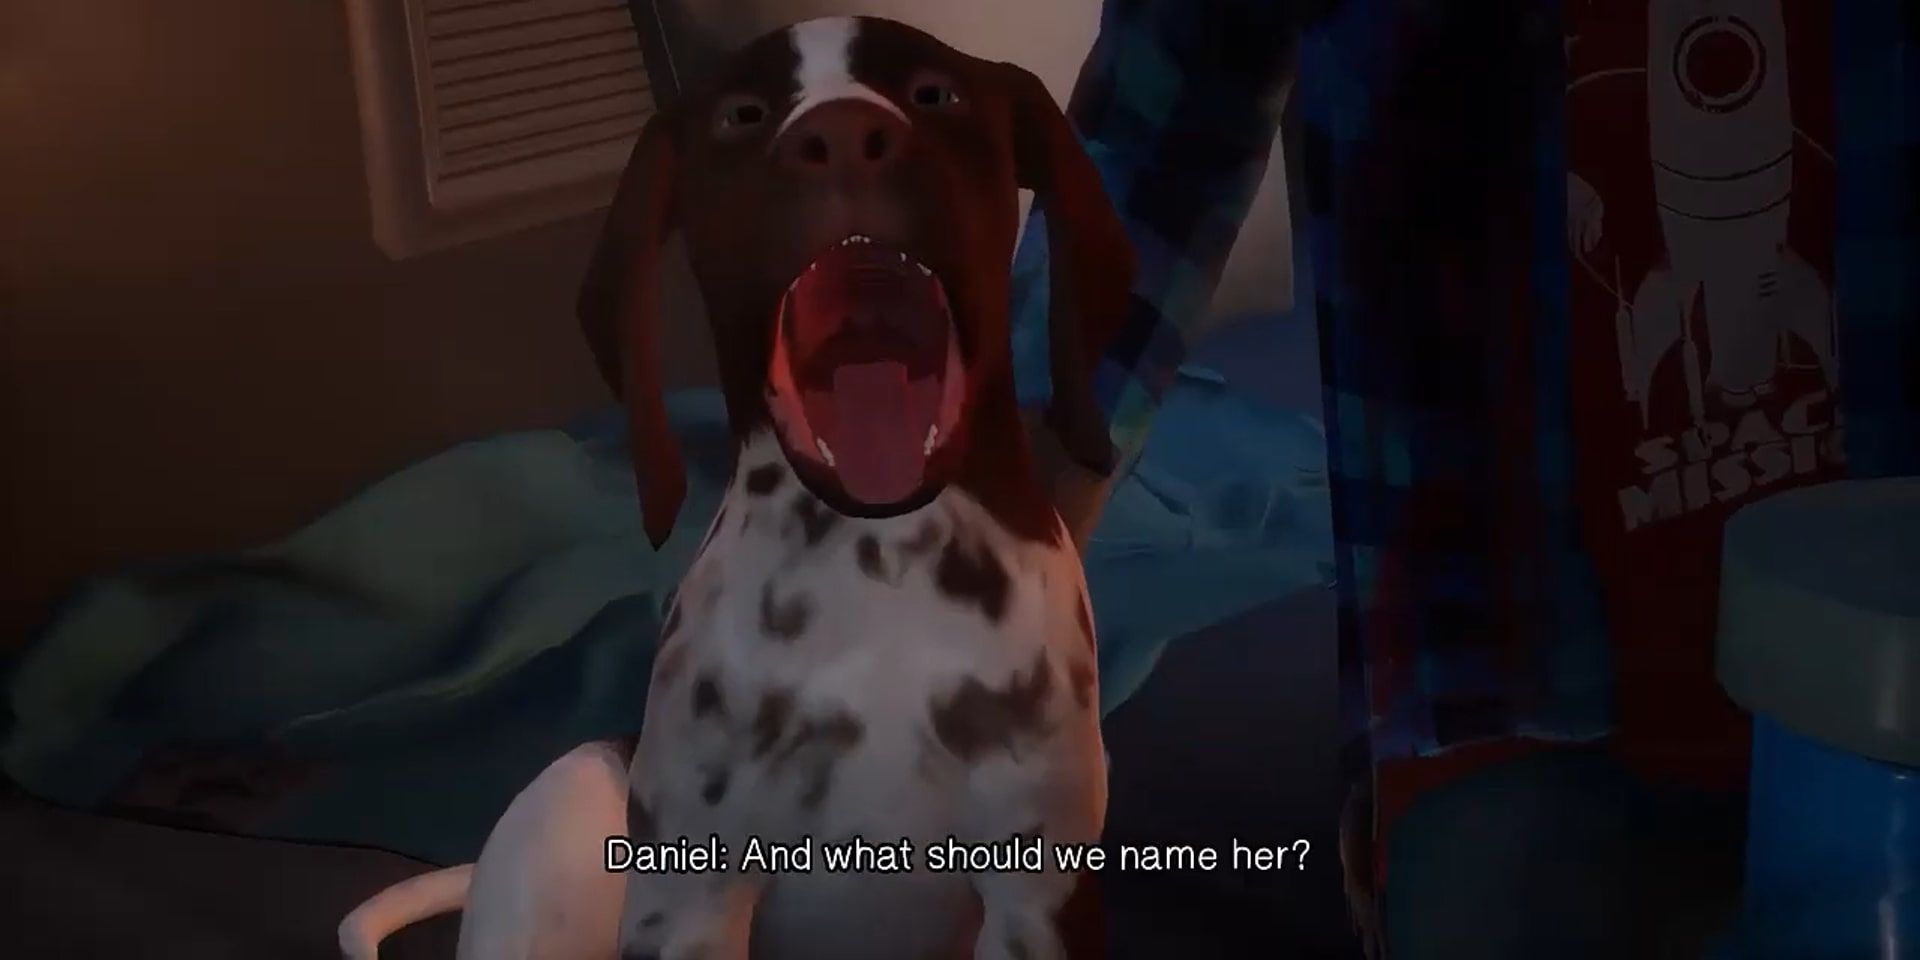 Heartwarming moment after the brothers escape and are on the road with Brody, where they name Mushroom, who's yawning cutely in Life is Strange 2